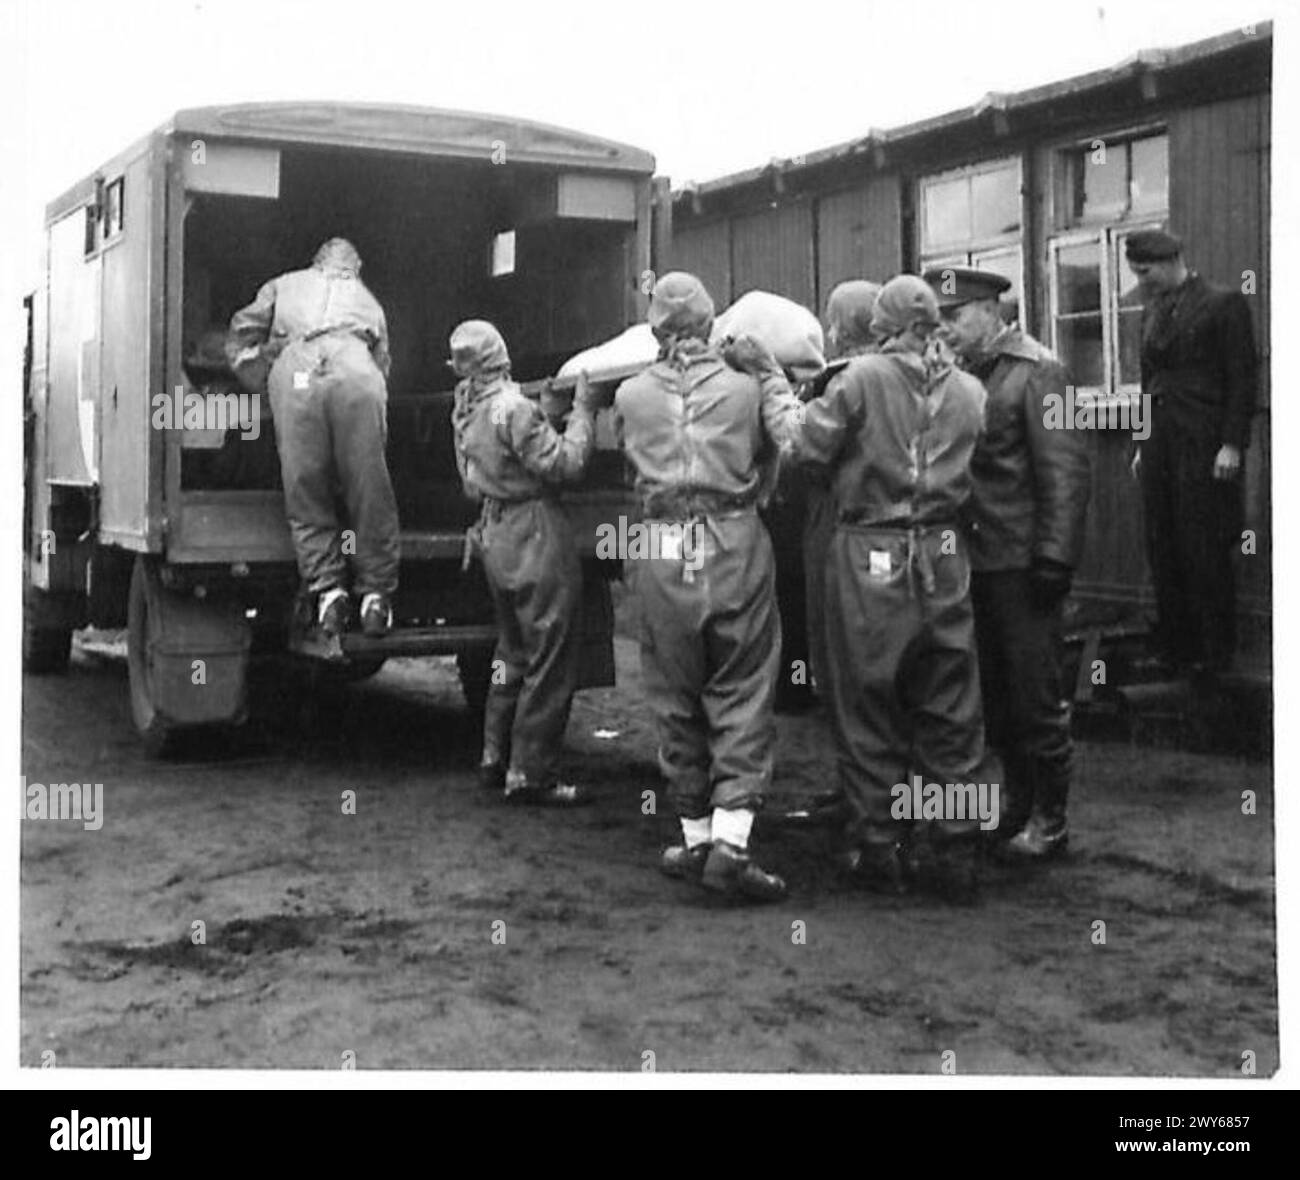 BELSEN CONCENTRATION CAMP - Men of the Light Field Ambulance evacuating men suffering from Typhus from their infested huts. These will be bathed, deloused and, in a fresh clean blanket, taken into our new makeshift hospital in the old ��S.S.' barracks which adjoins the camp. Those who are able to walk are escorted to the bath house, a temporary system we have erected in the old camp crematorium, where they each receive one piece of soap and a clean towel. After bathing, they are deloused and fitted with new clothes [collected locally from the German civilians]. Their old infested rags are then Stock Photo